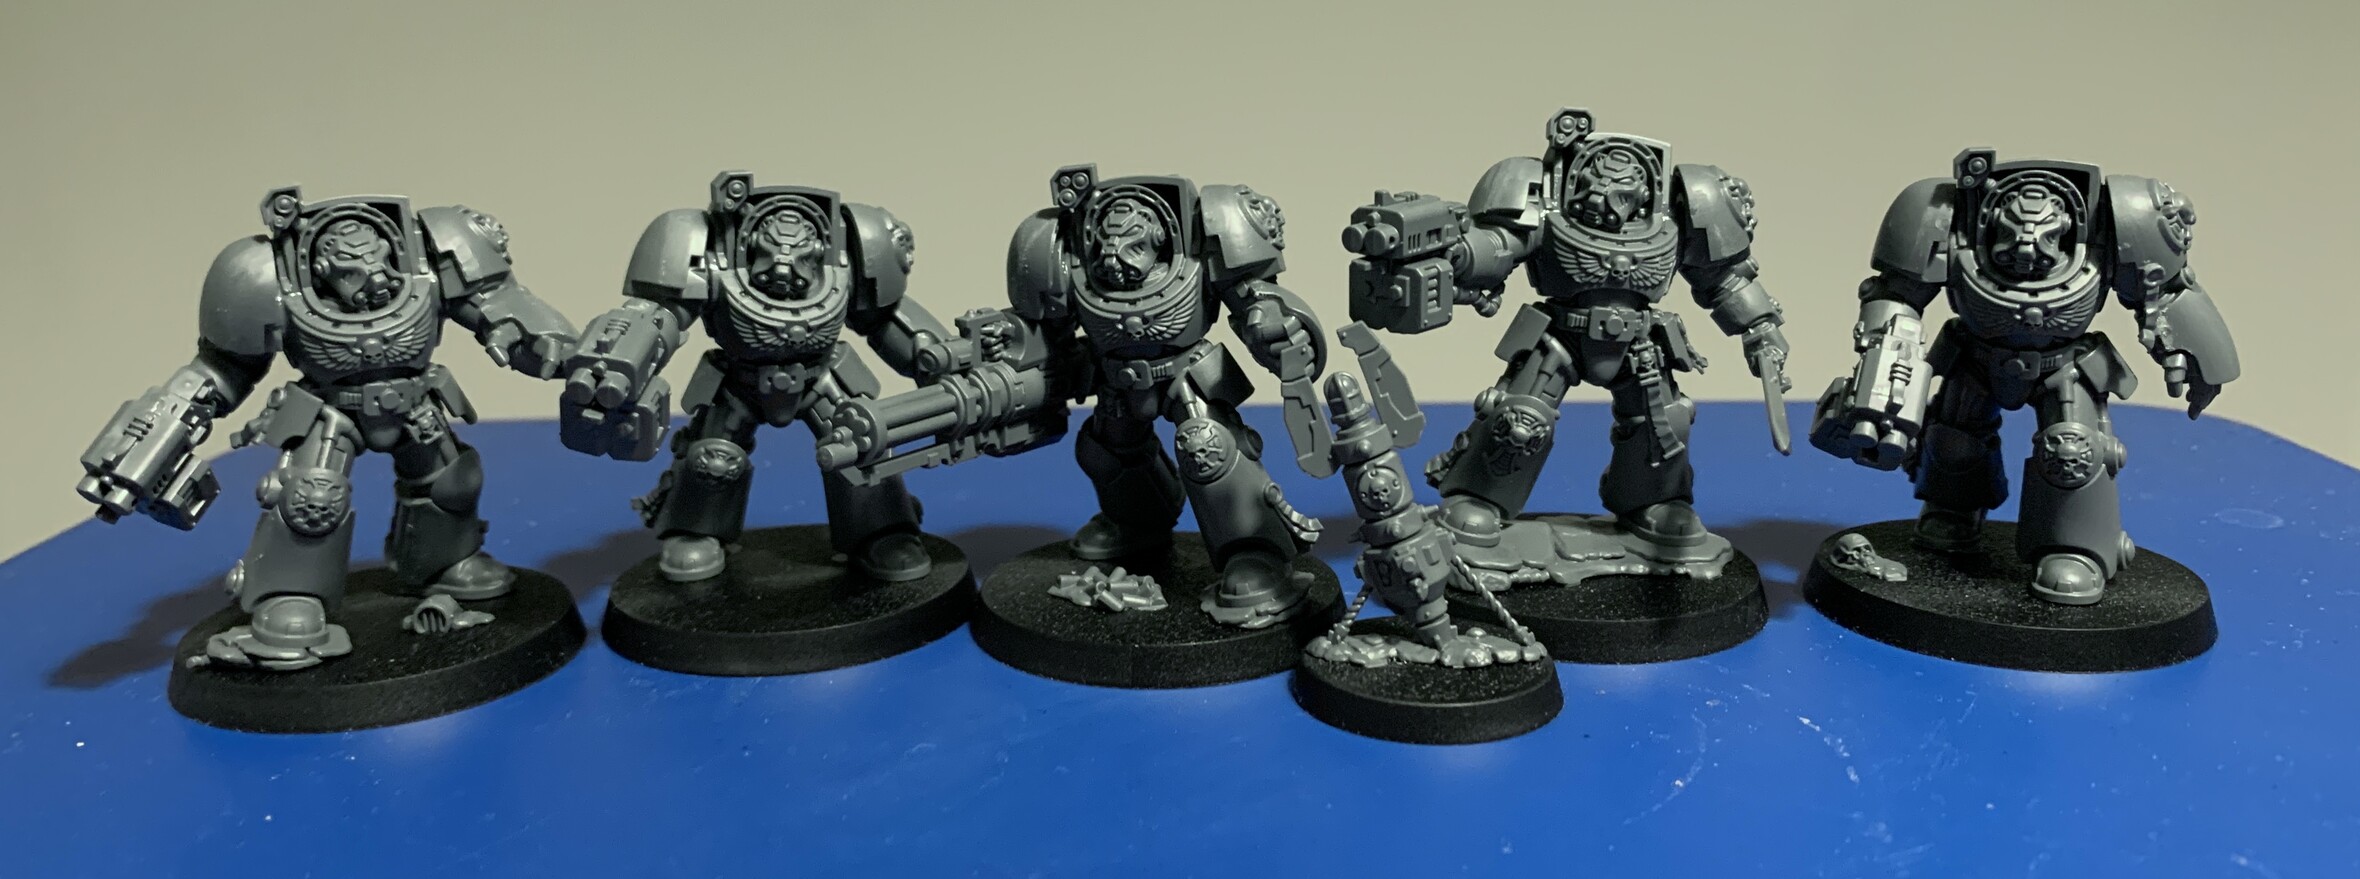 5 of the new larger Warhammer 40k terminator space marine models with a homing beacon in front. They have assortment of weapons with most carrying dual barrelled weapons. One has a large barrelled mini-gun style weapon and one is carry a sword. The homing beacon looks like a missile that’s landed and lodged in the ground.